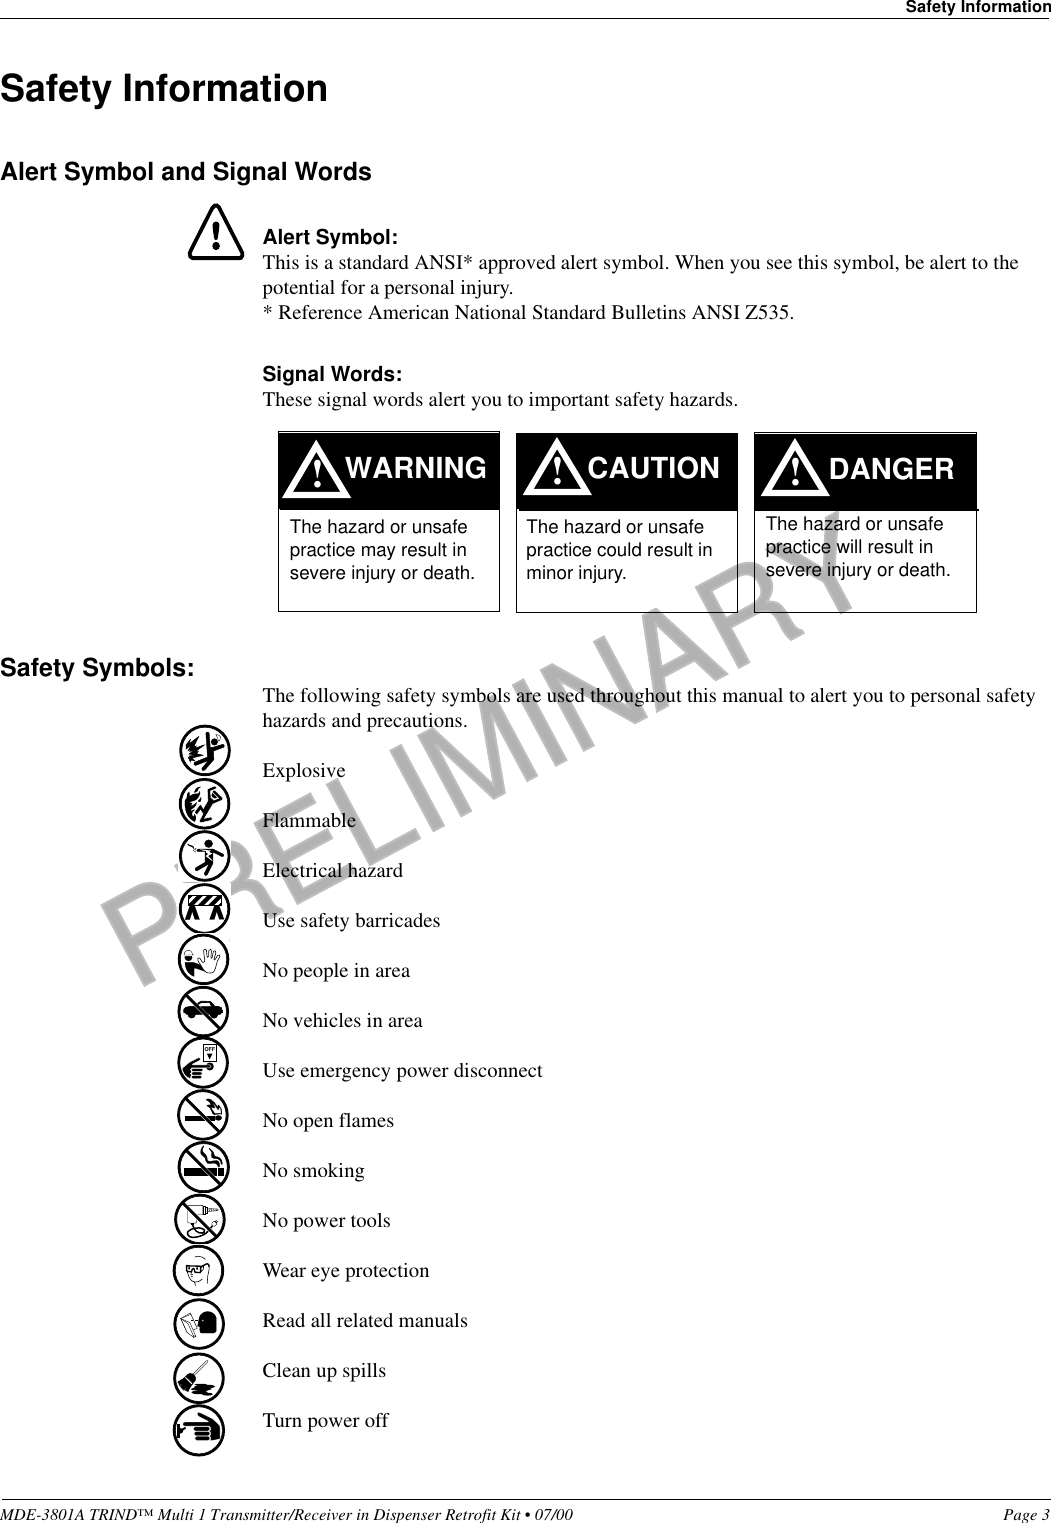 PRELIMINARYMDE-3801A TRIND™ Multi 1 Transmitter/Receiver in Dispenser Retrofit Kit • 07/00 Page 3Safety InformationSafety InformationAlert Symbol and Signal WordsAlert Symbol:This is a standard ANSI* approved alert symbol. When you see this symbol, be alert to the potential for a personal injury.* Reference American National Standard Bulletins ANSI Z535.Signal Words:These signal words alert you to important safety hazards.Safety Symbols: The following safety symbols are used throughout this manual to alert you to personal safety hazards and precautions.ExplosiveFlammableElectrical hazardUse safety barricadesNo people in areaNo vehicles in areaUse emergency power disconnectNo open flamesNo smokingNo power toolsWear eye protectionRead all related manualsClean up spillsTurn power off!WARNINGThe hazard or unsafe practice may result in severe injury or death. !CAUTIONThe hazard or unsafe practice could result in minor injury. The hazard or unsafe practice will result in severe injury or death.!DANGEROFF